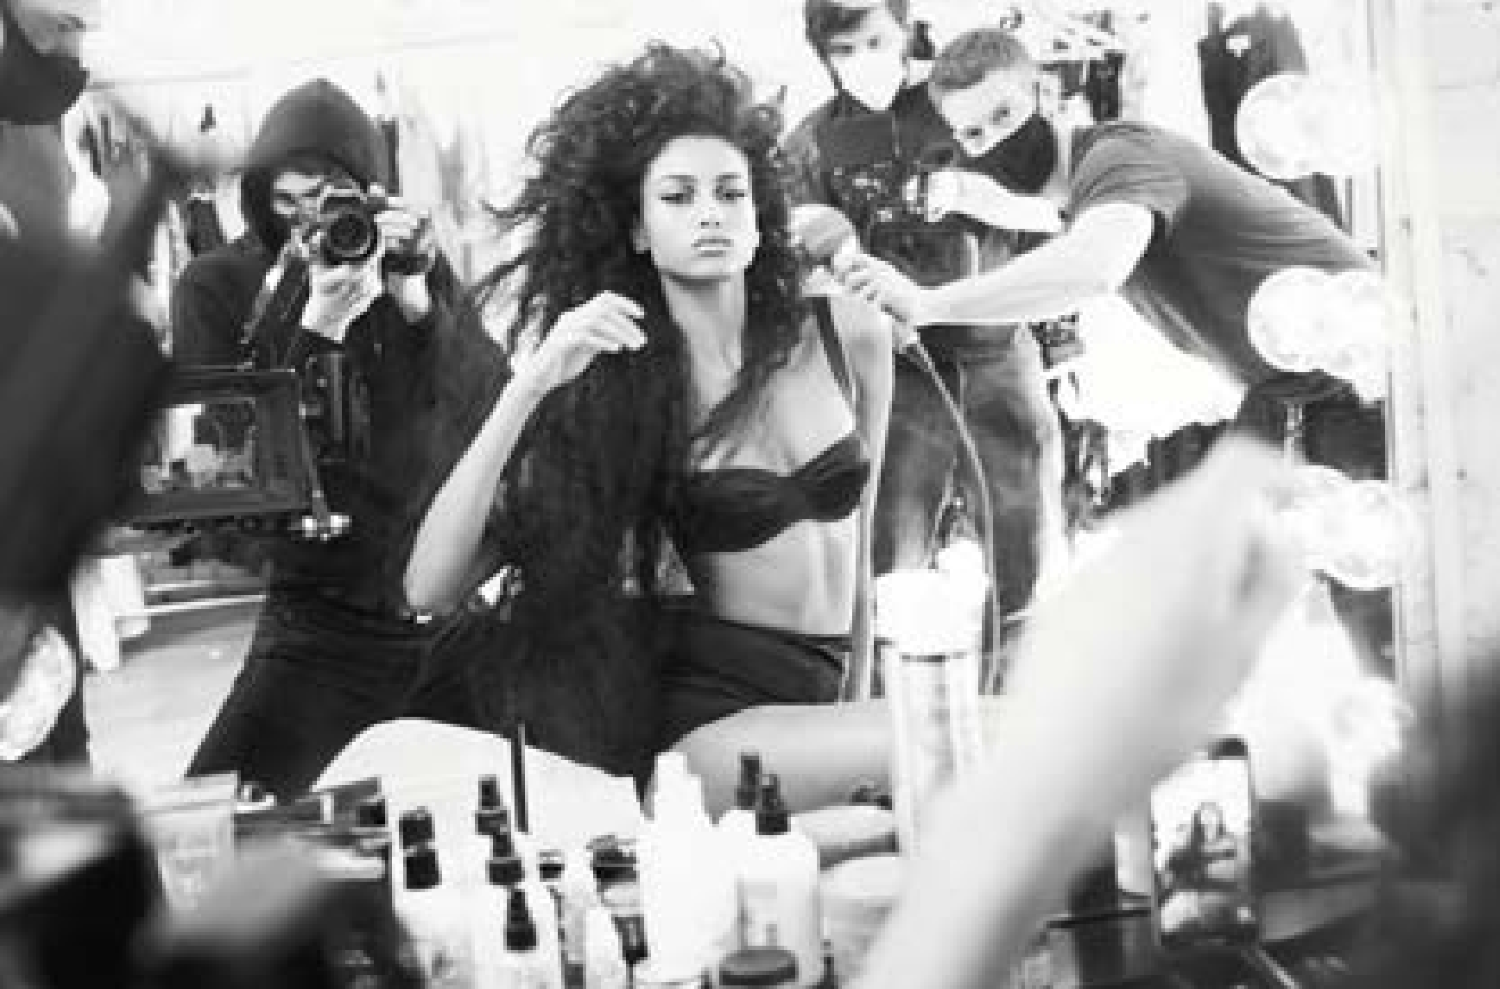 Imaan Hammam by Ethan James Green M Le Mag du Monde 2-27-21 (2).png